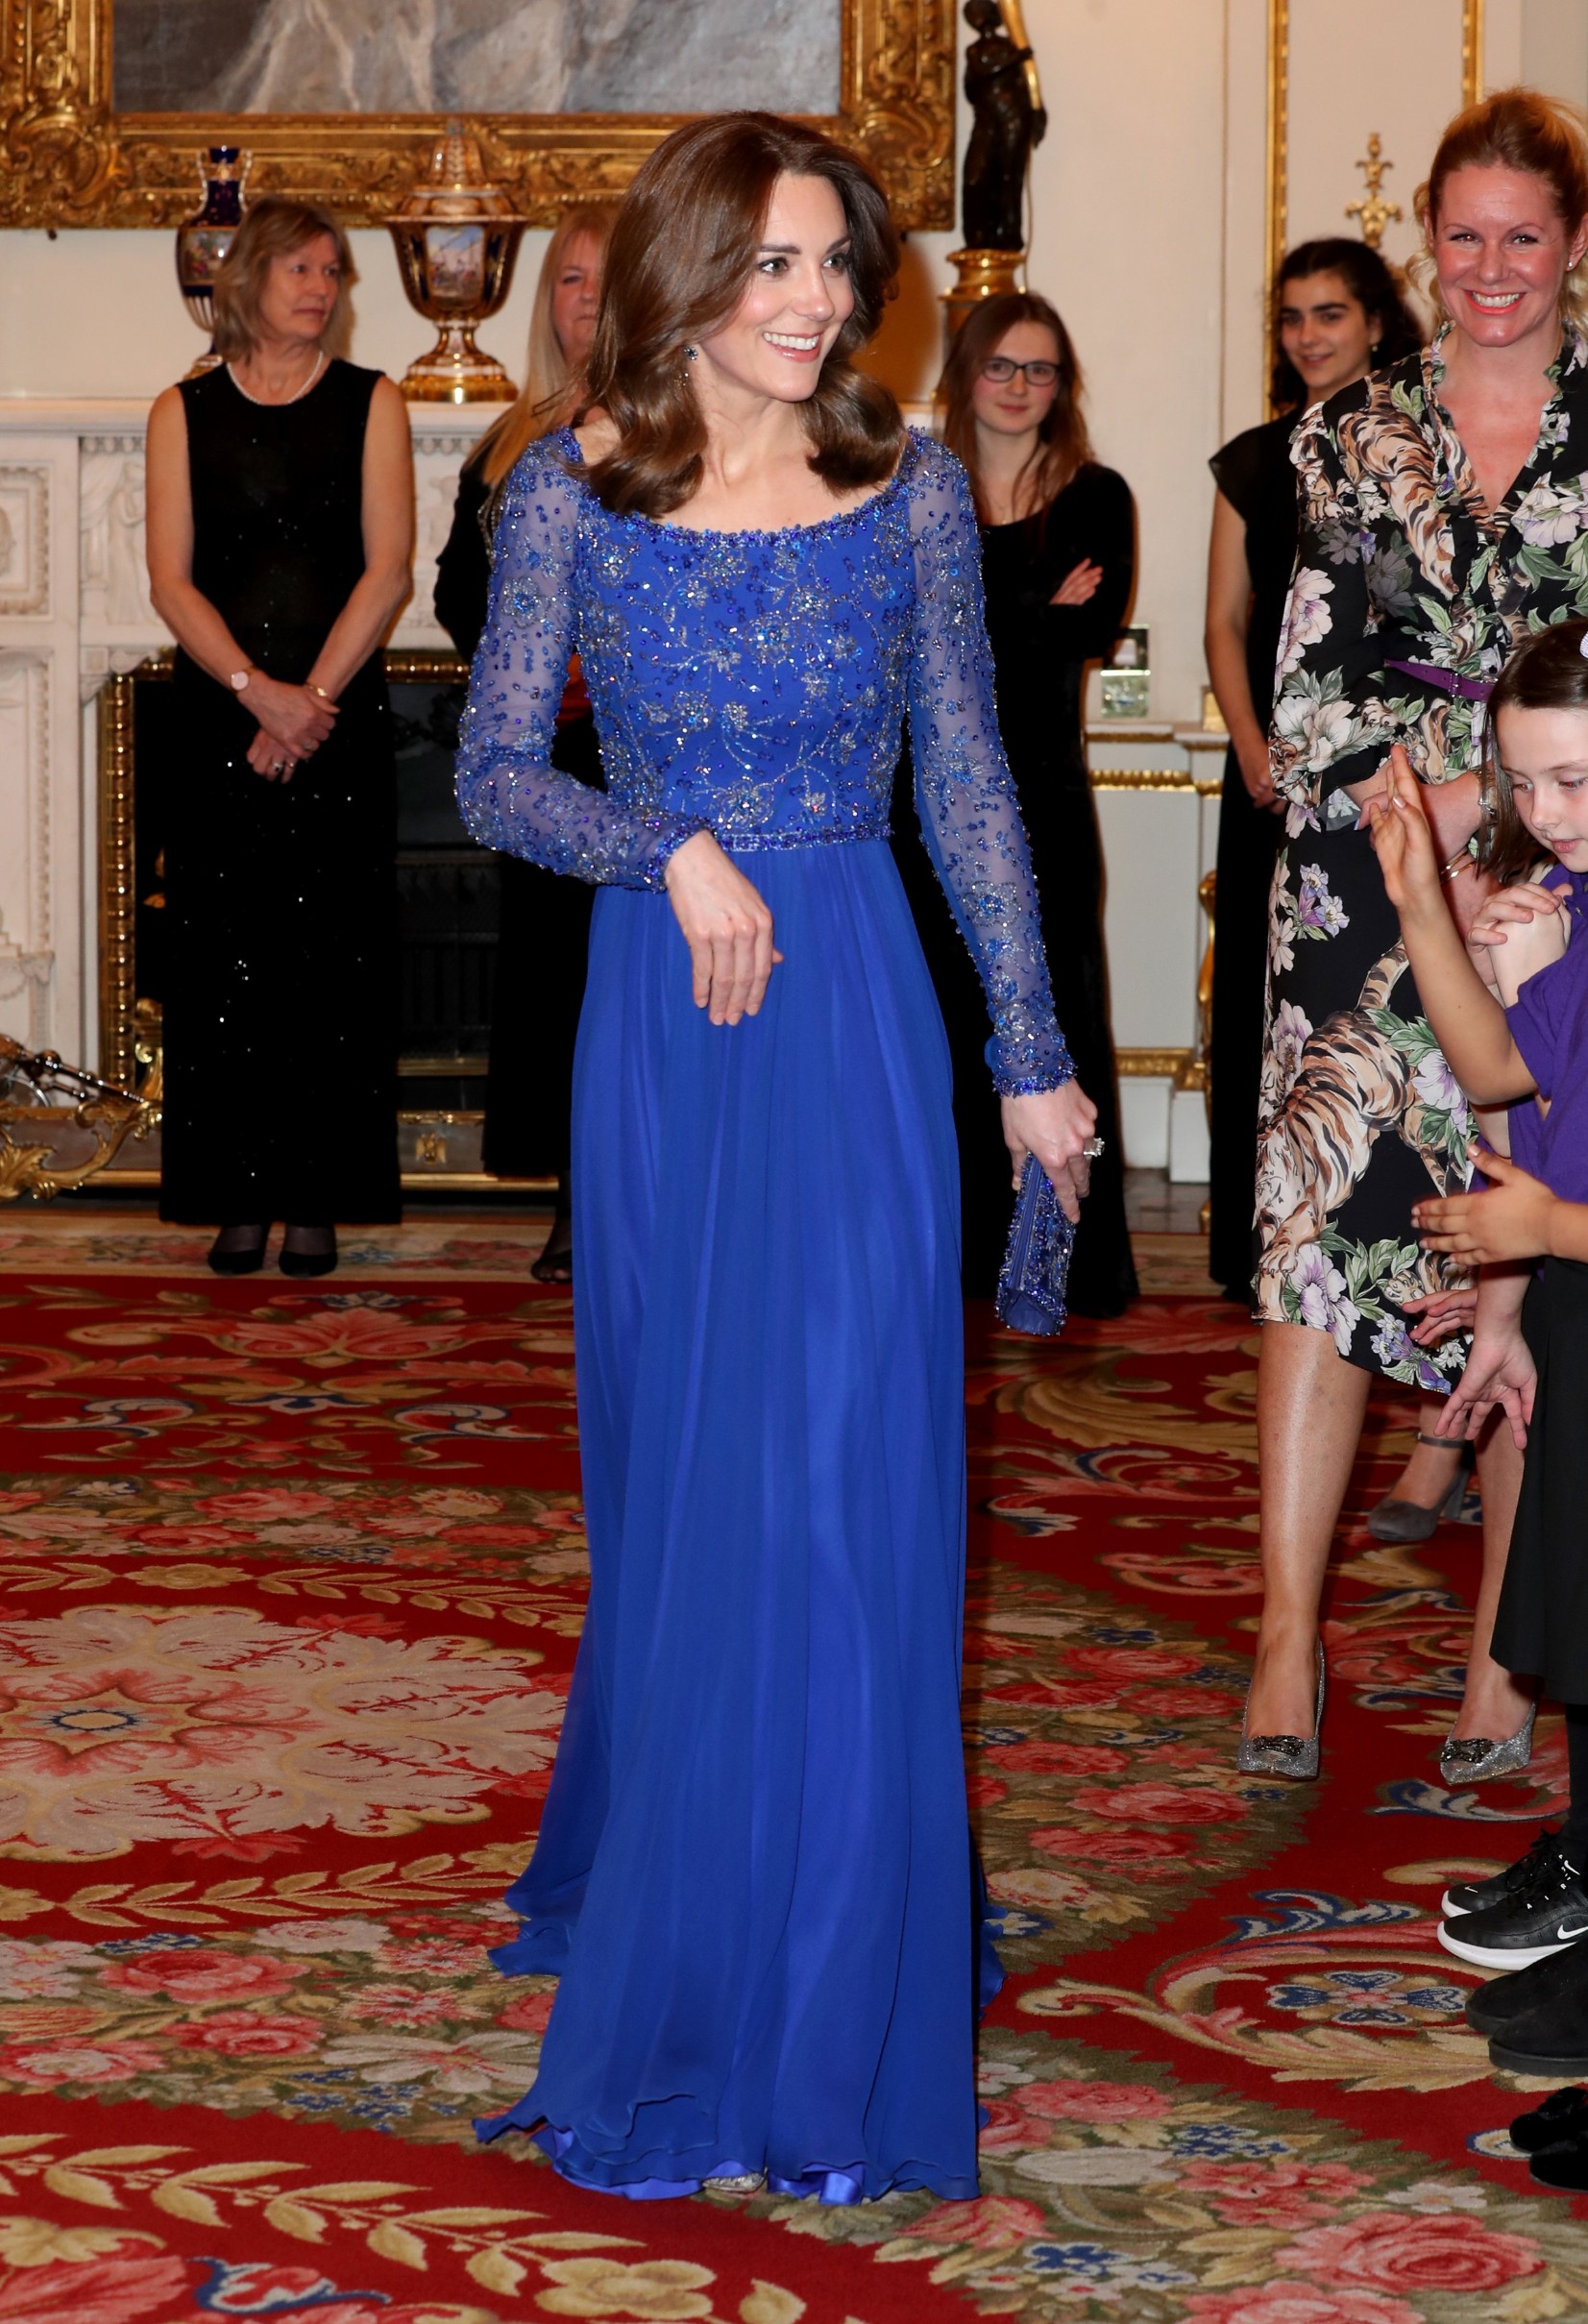 Catherine Duchess of Cambridge hosts a Gala Dinner in celebration of the 25th anniversary of Place2Be at Buckingham Palace.
Place2Be 25th Anniversary Gala Dinner, Buckingham Palace, London, UK - 09 Mar 2020
The Duchess is Patron of Place2Be, which provides emotional support at an early age and believes no child should face mental health difficulties alone., Image: 504944372, License: Rights-managed, Restrictions: , Model Release: no, Credit line: REX / Shutterstock Editorial / Profimedia